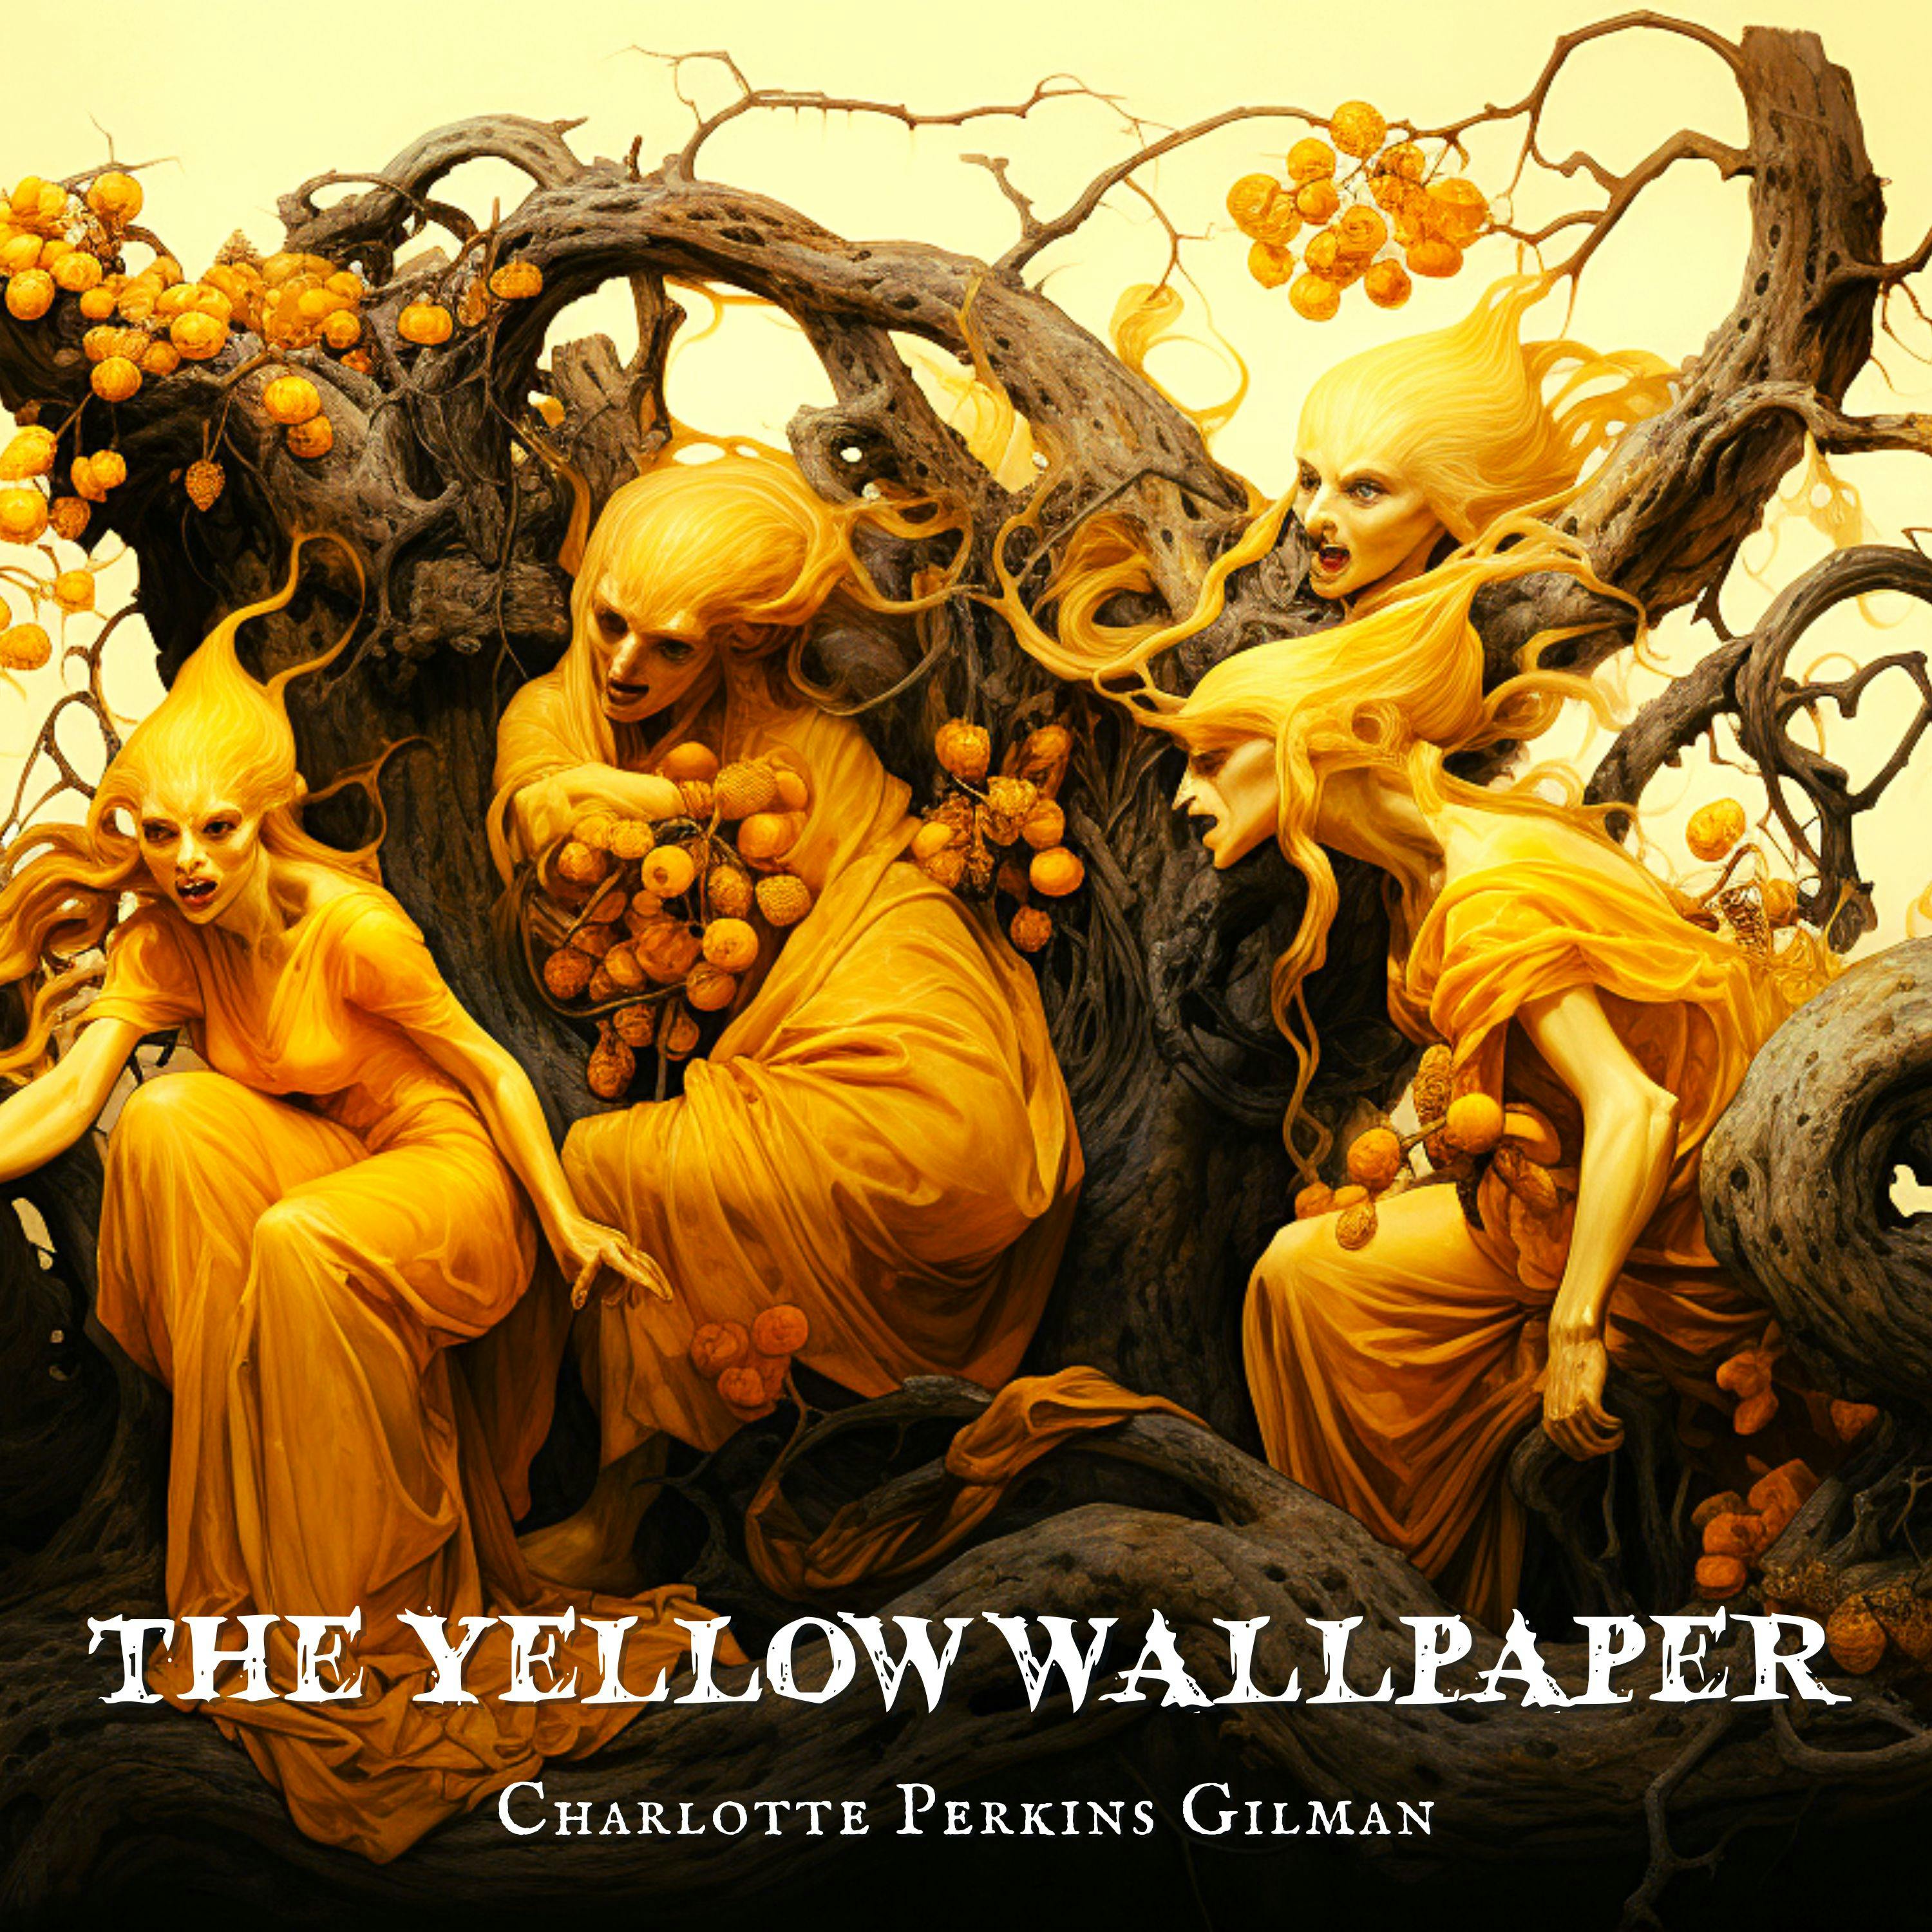 Episode 1: The Yellow Wallpaper by Charlotte Perkins Gilman